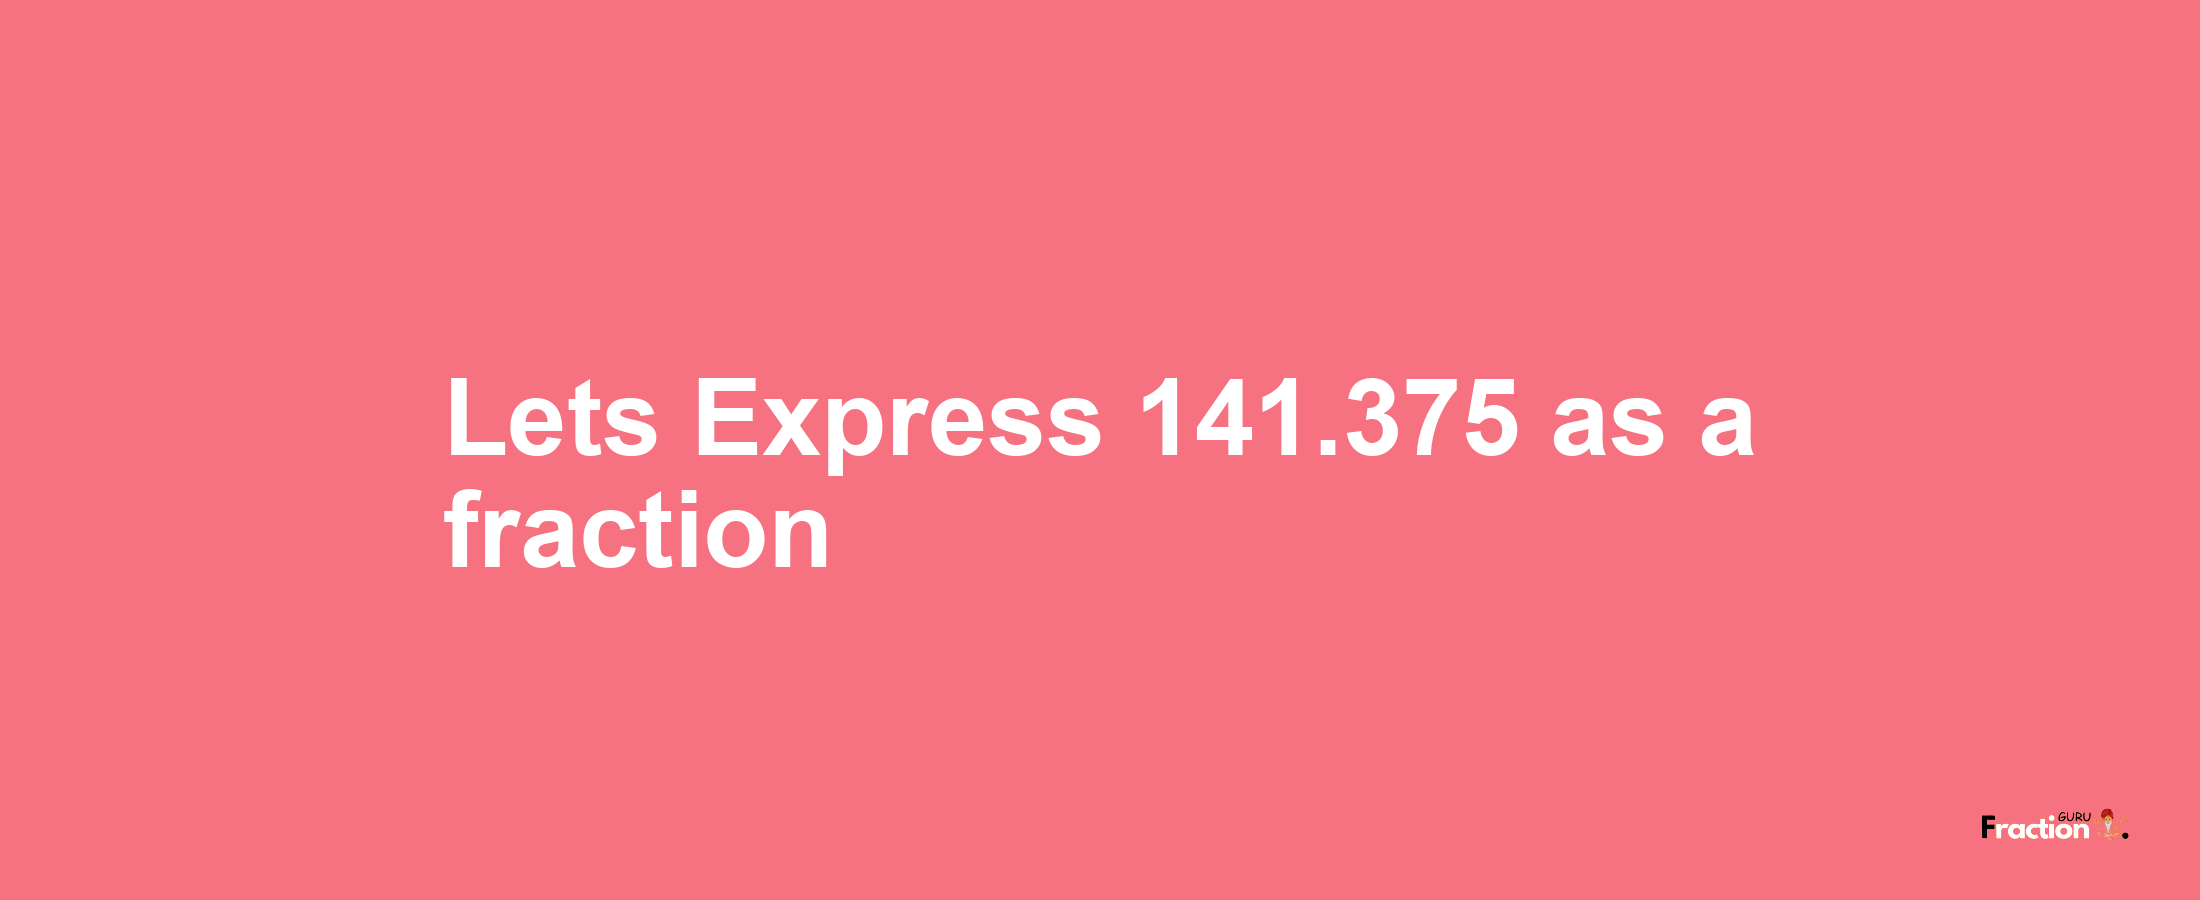 Lets Express 141.375 as afraction